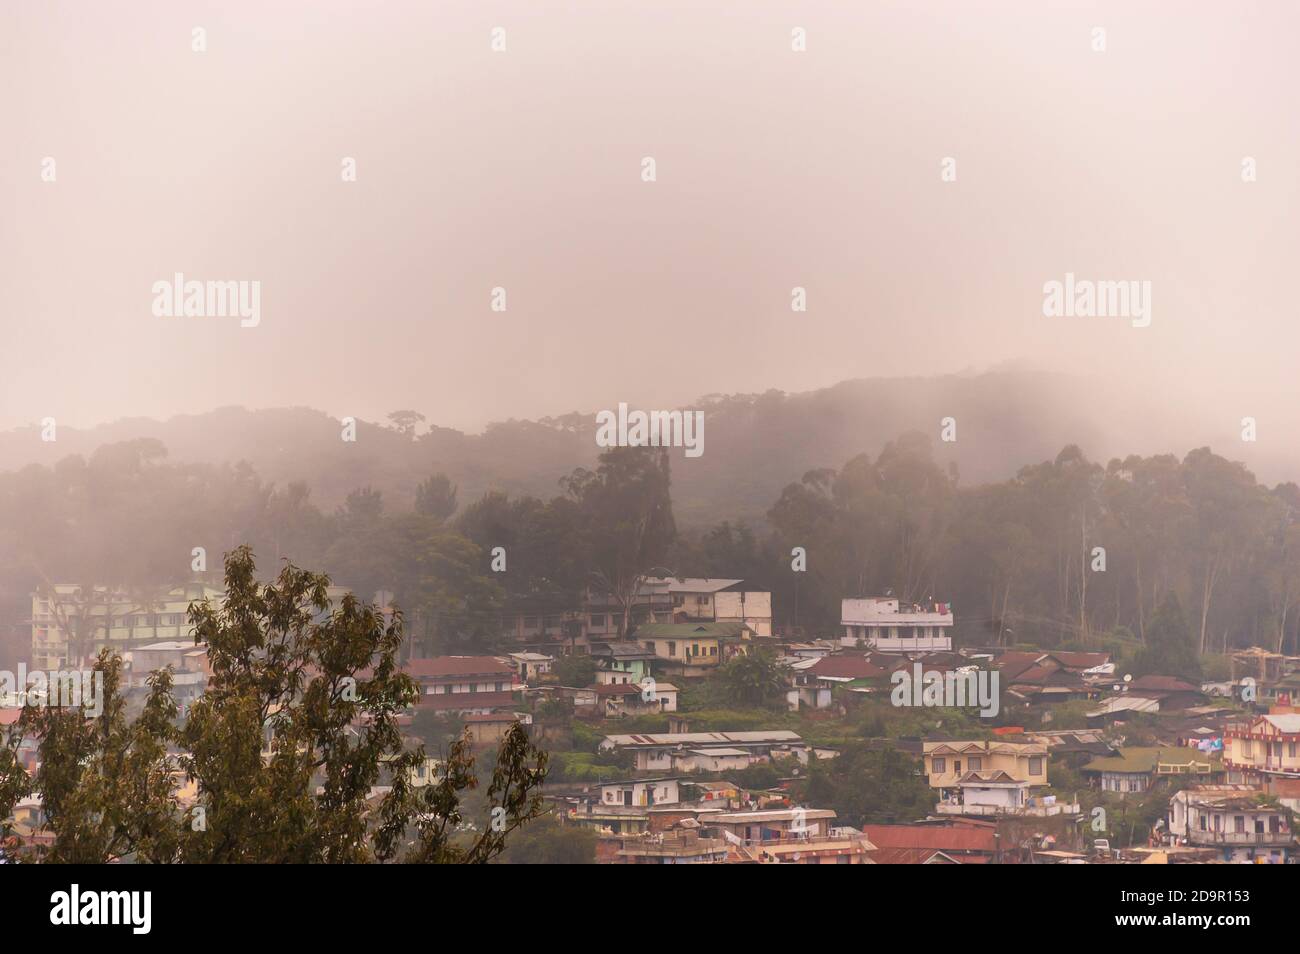 Fog rolls into Shillong city in Meghalaya, India, from across the mountain after an afternoon thunderstorm during the monsoon season. Stock Photo